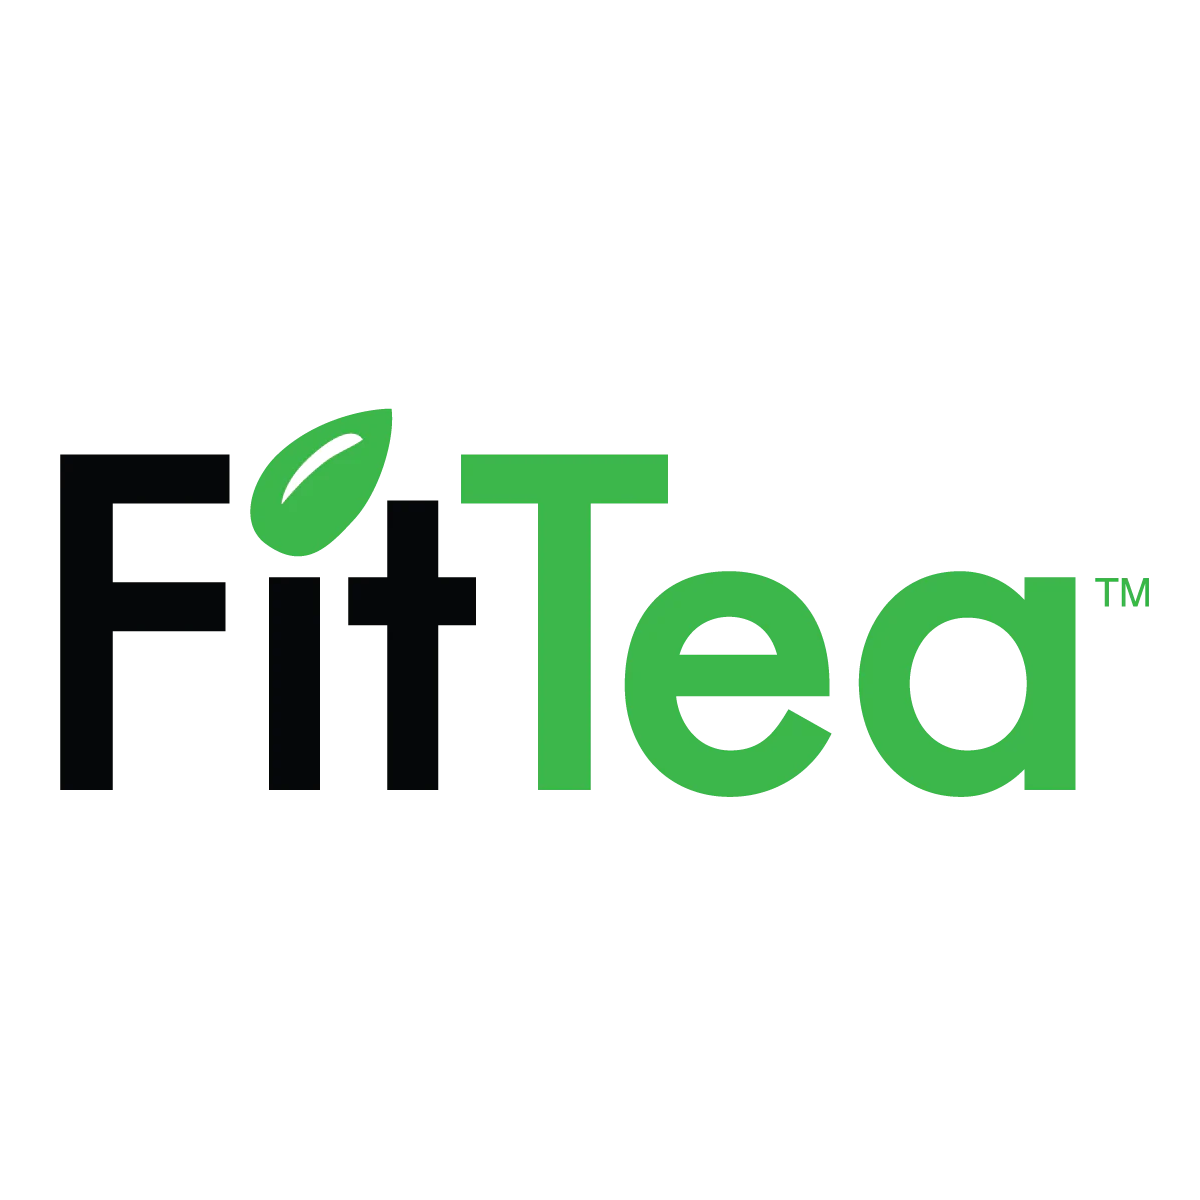 fittea logo (square).png